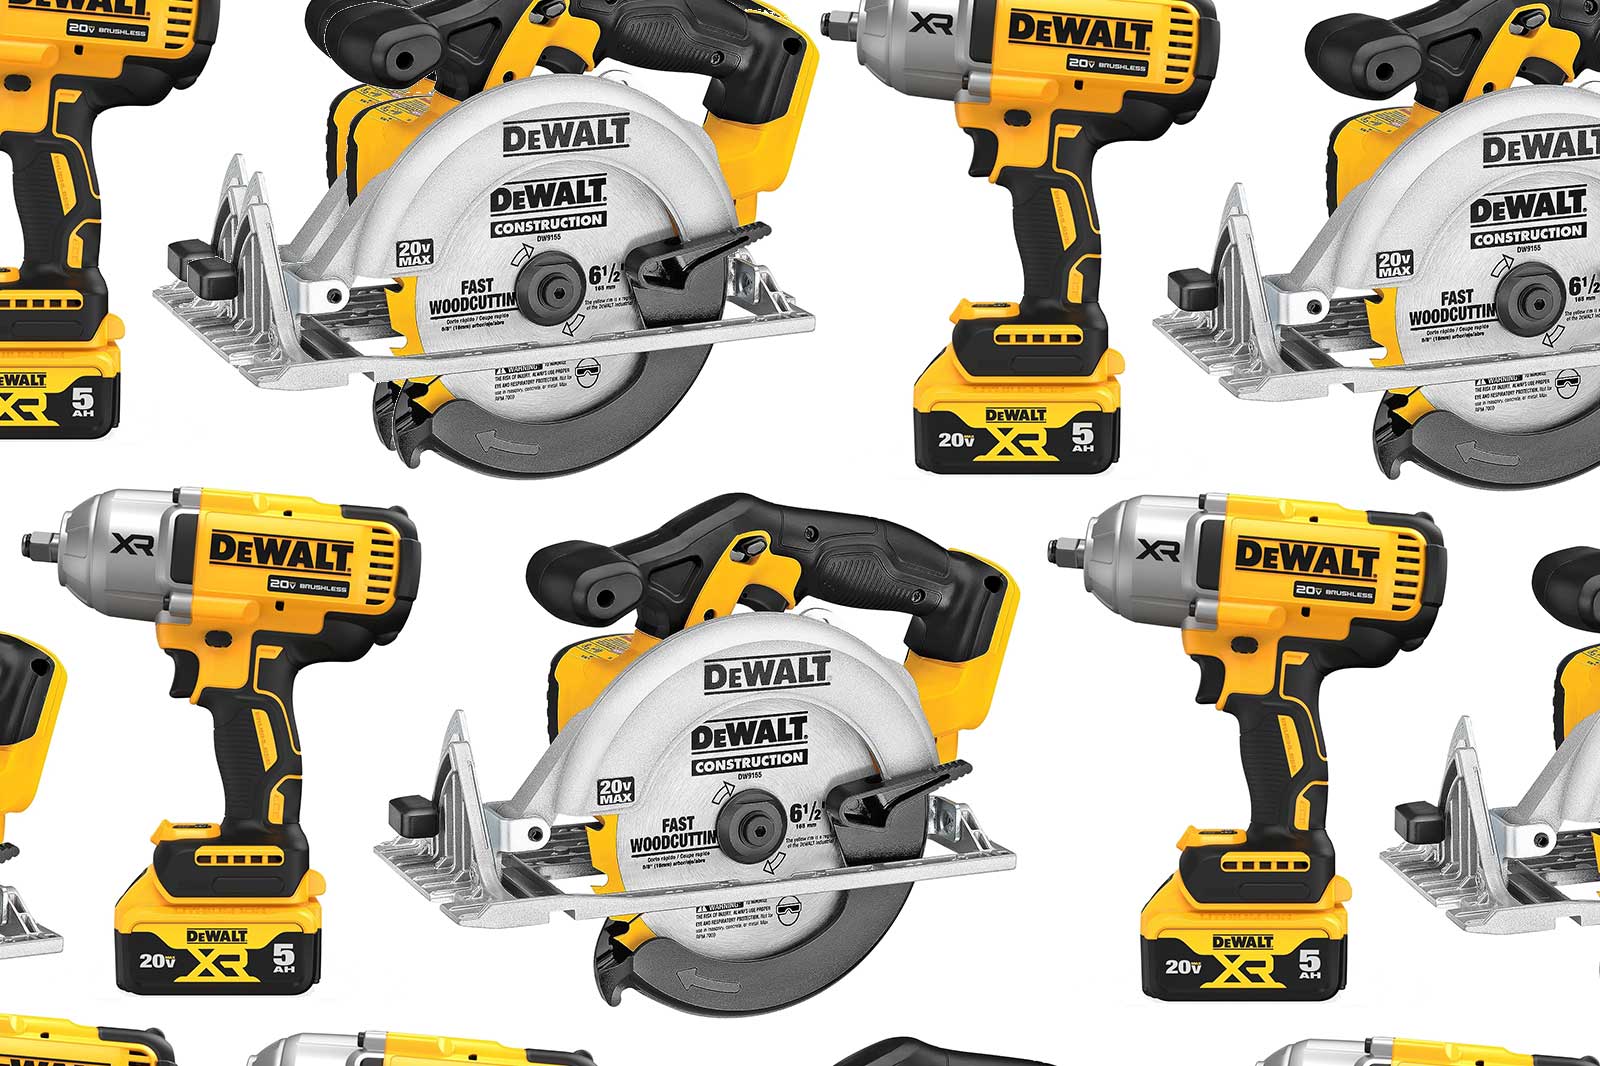 Save up to 50% on DeWalt power tools, batteries, and kits during